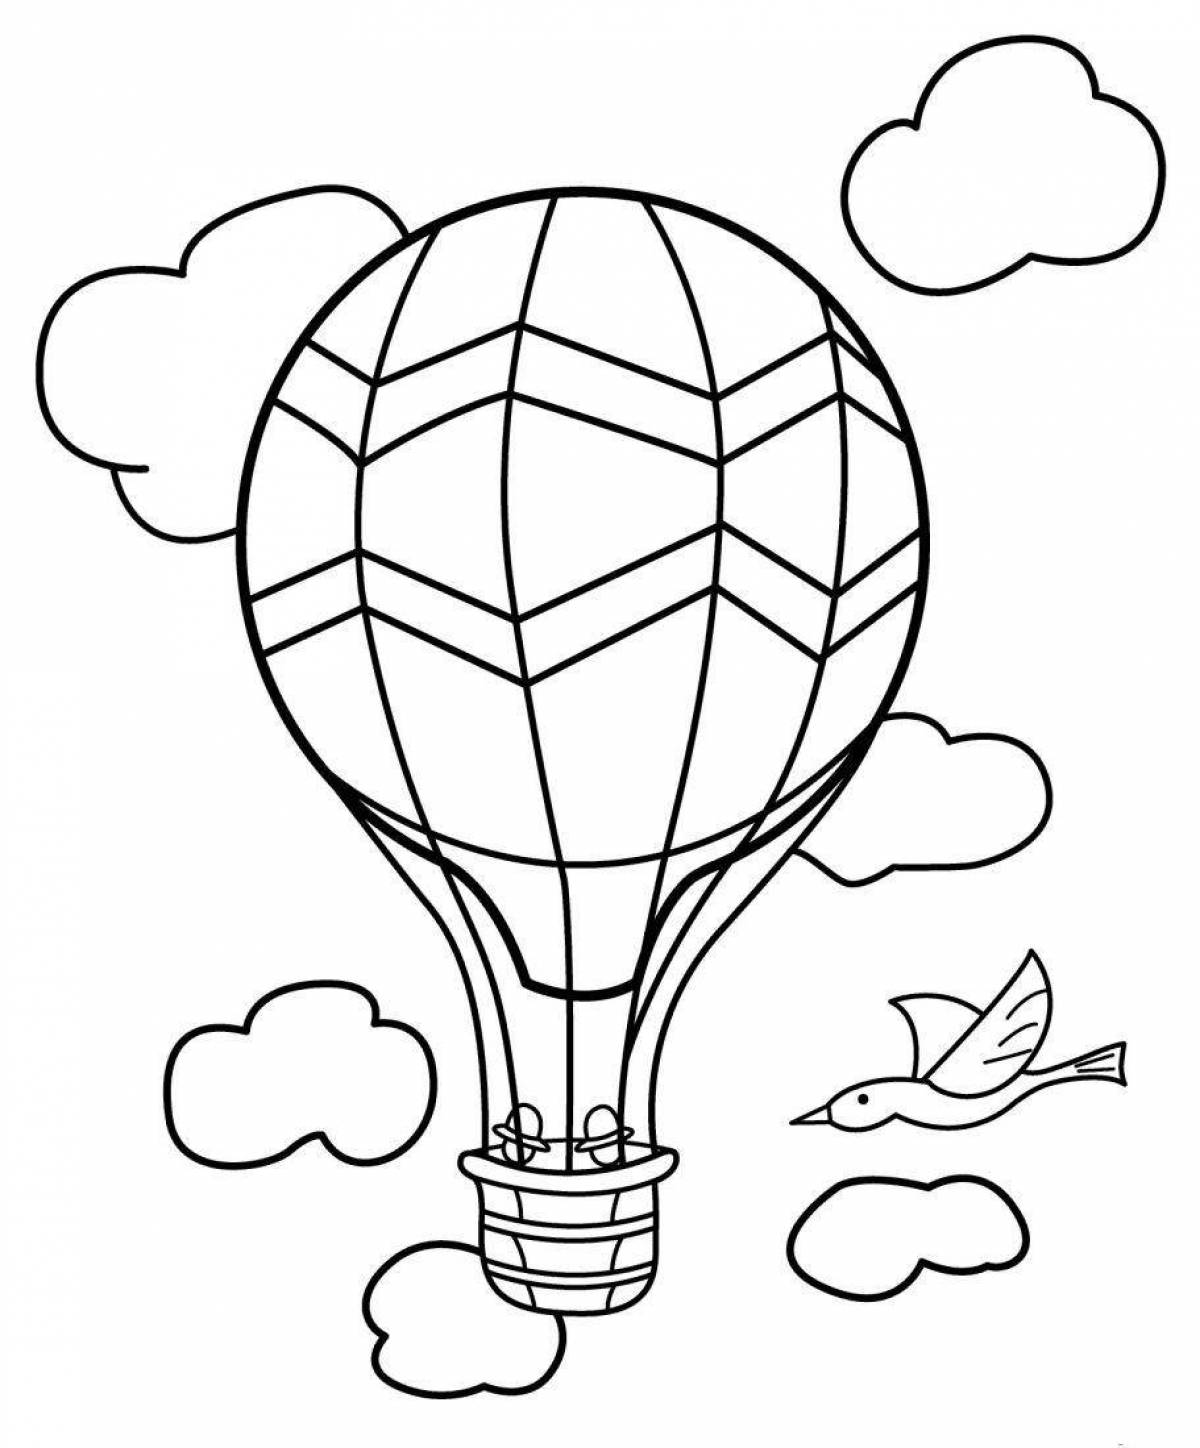 Coloring book wild balloon for kids